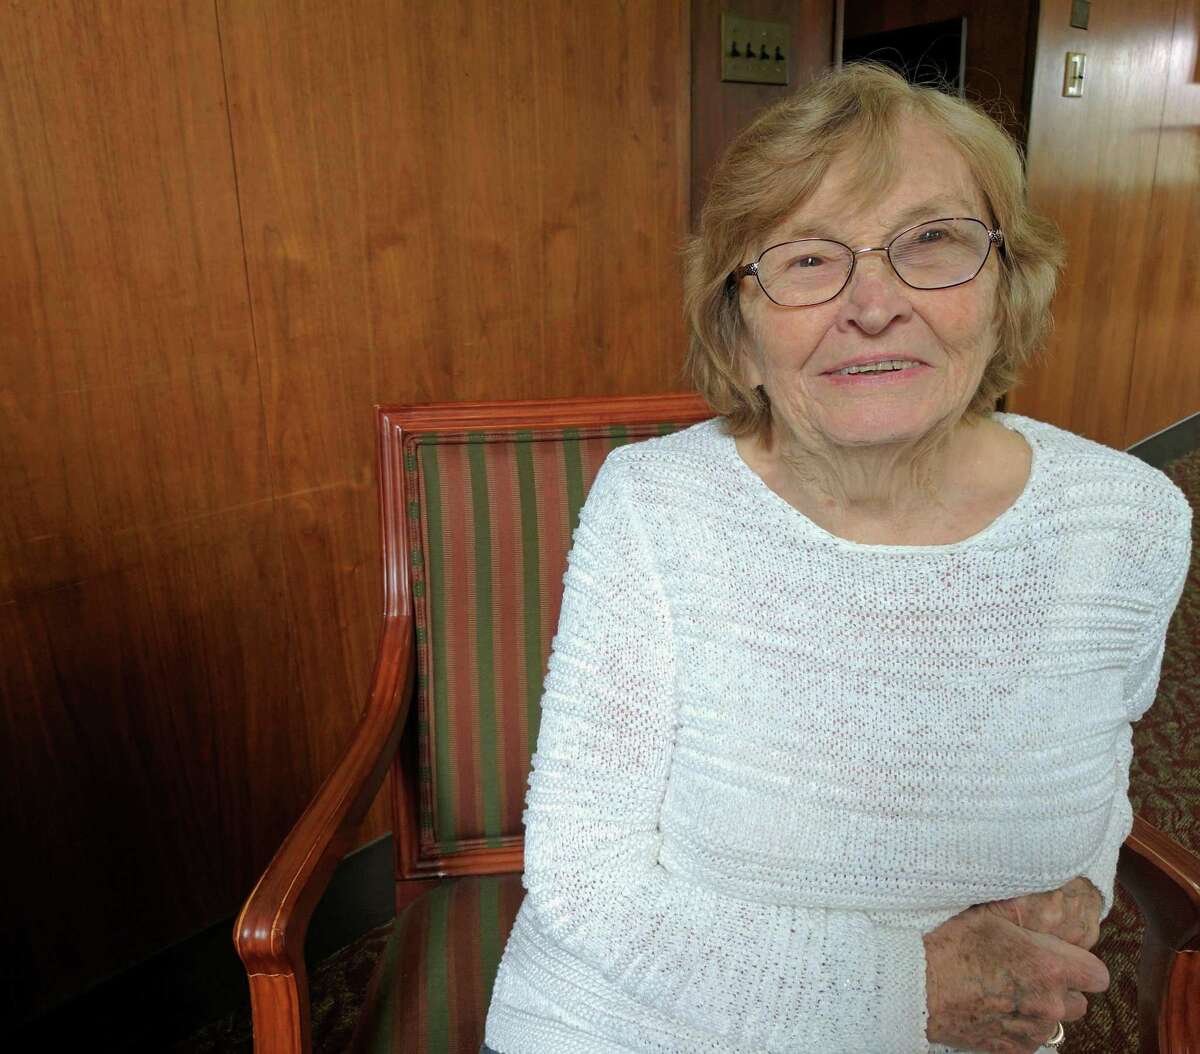 Marion Milazzo enjoys amazing her great-grandchildren with tales of growing up during World War II.